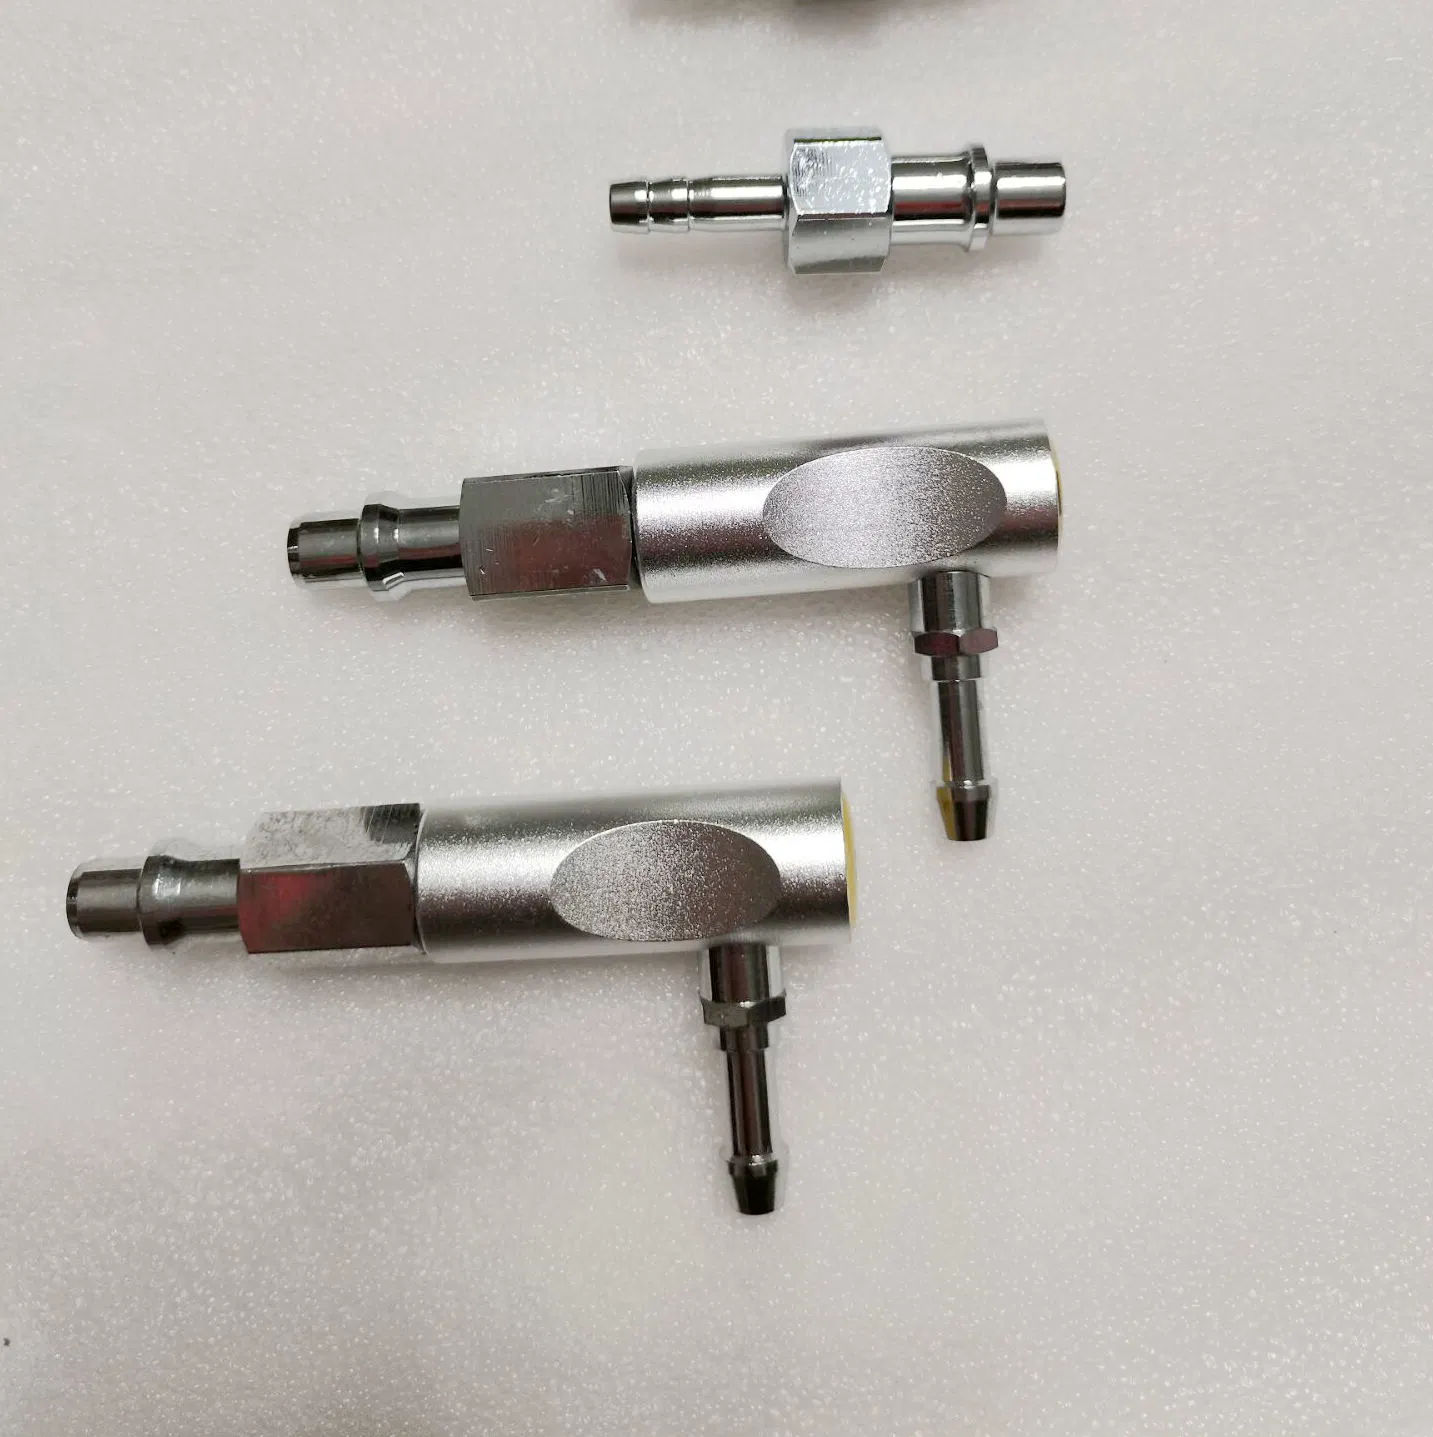 Germany Standard Medical Gas Probes (adapters)